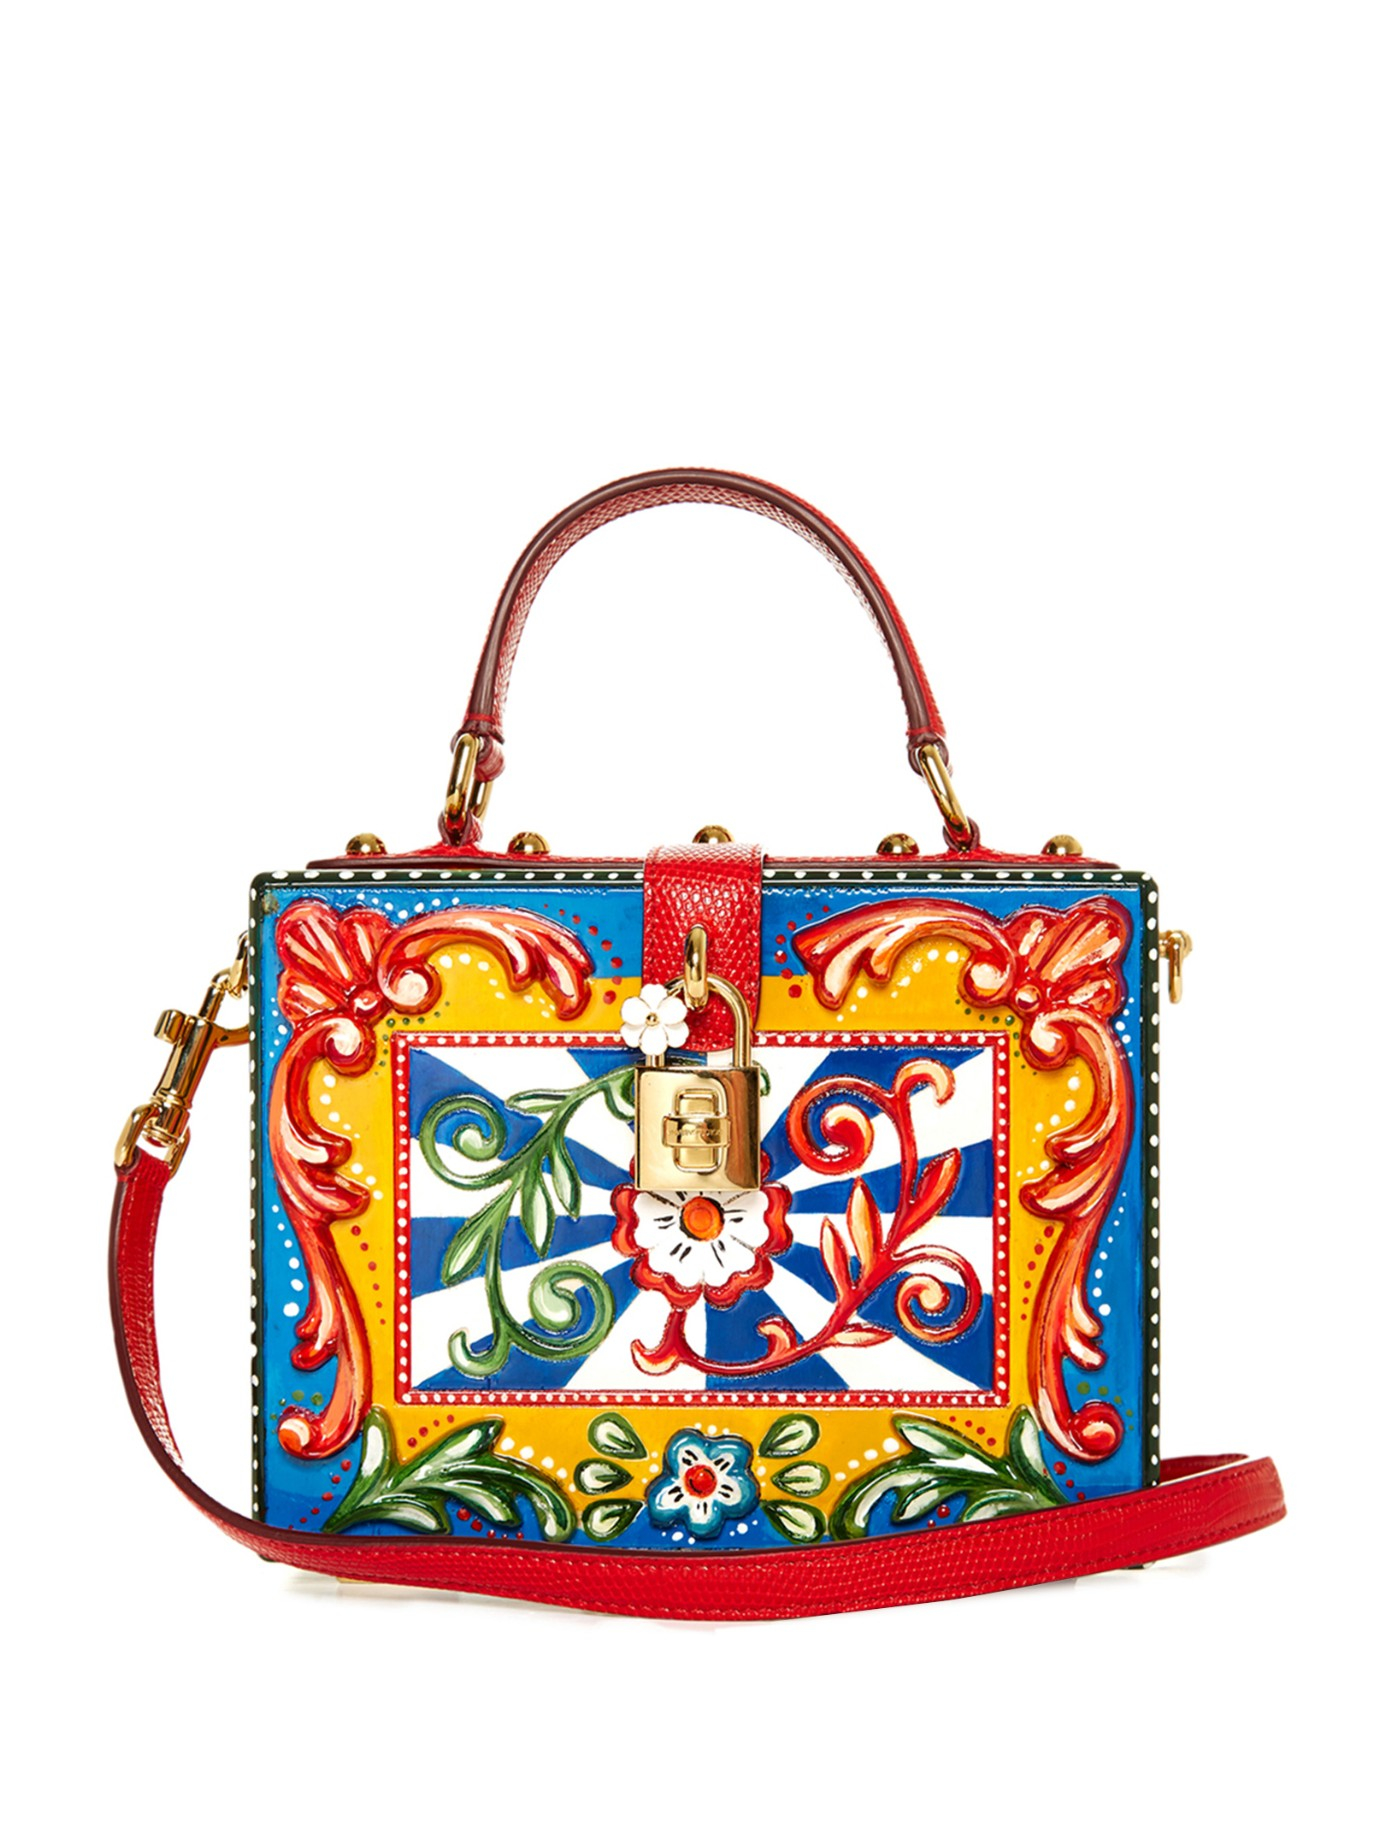 Dolce & Gabbana Dolce Hand-painted Floral-print Box Bag in Blue | Lyst